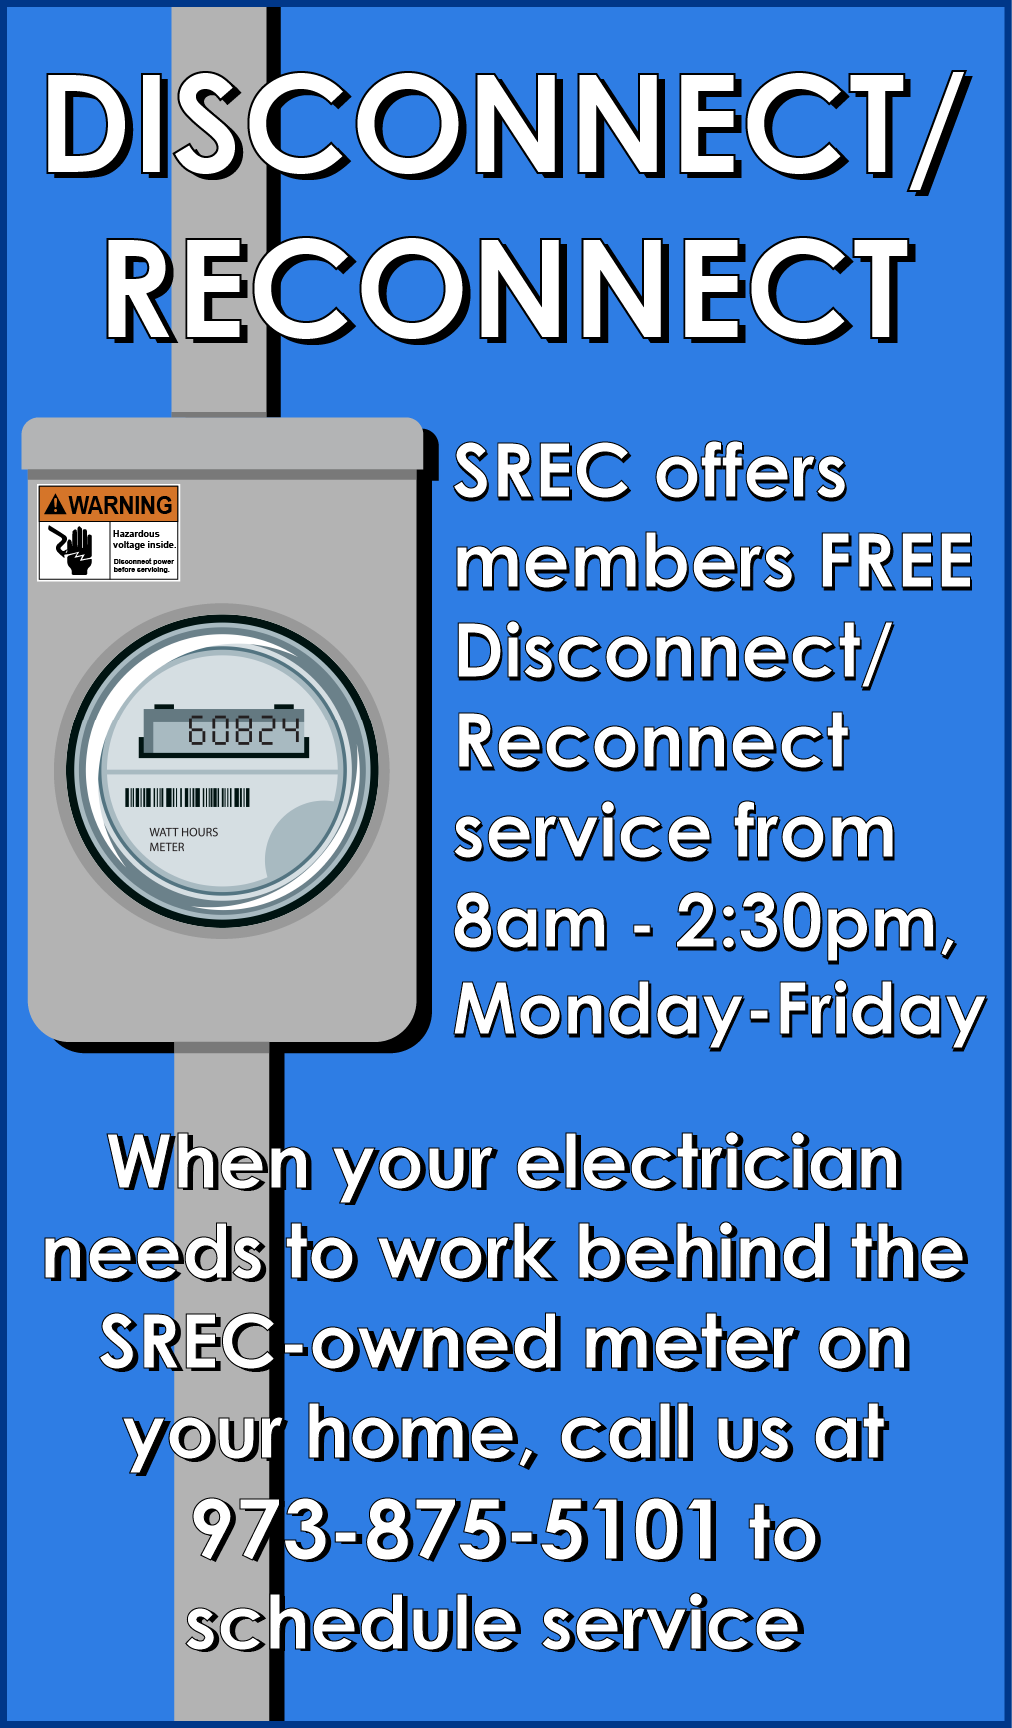 DISCONNECT/RECONNECT: SREC offers members FREE Disconnect/Reconnect service from 8am - 2:30 pm, Monday - Friday. When you electrician needs to work behind the SREC-owned meter on your home, call us at 973-875-5101 to schedule service.